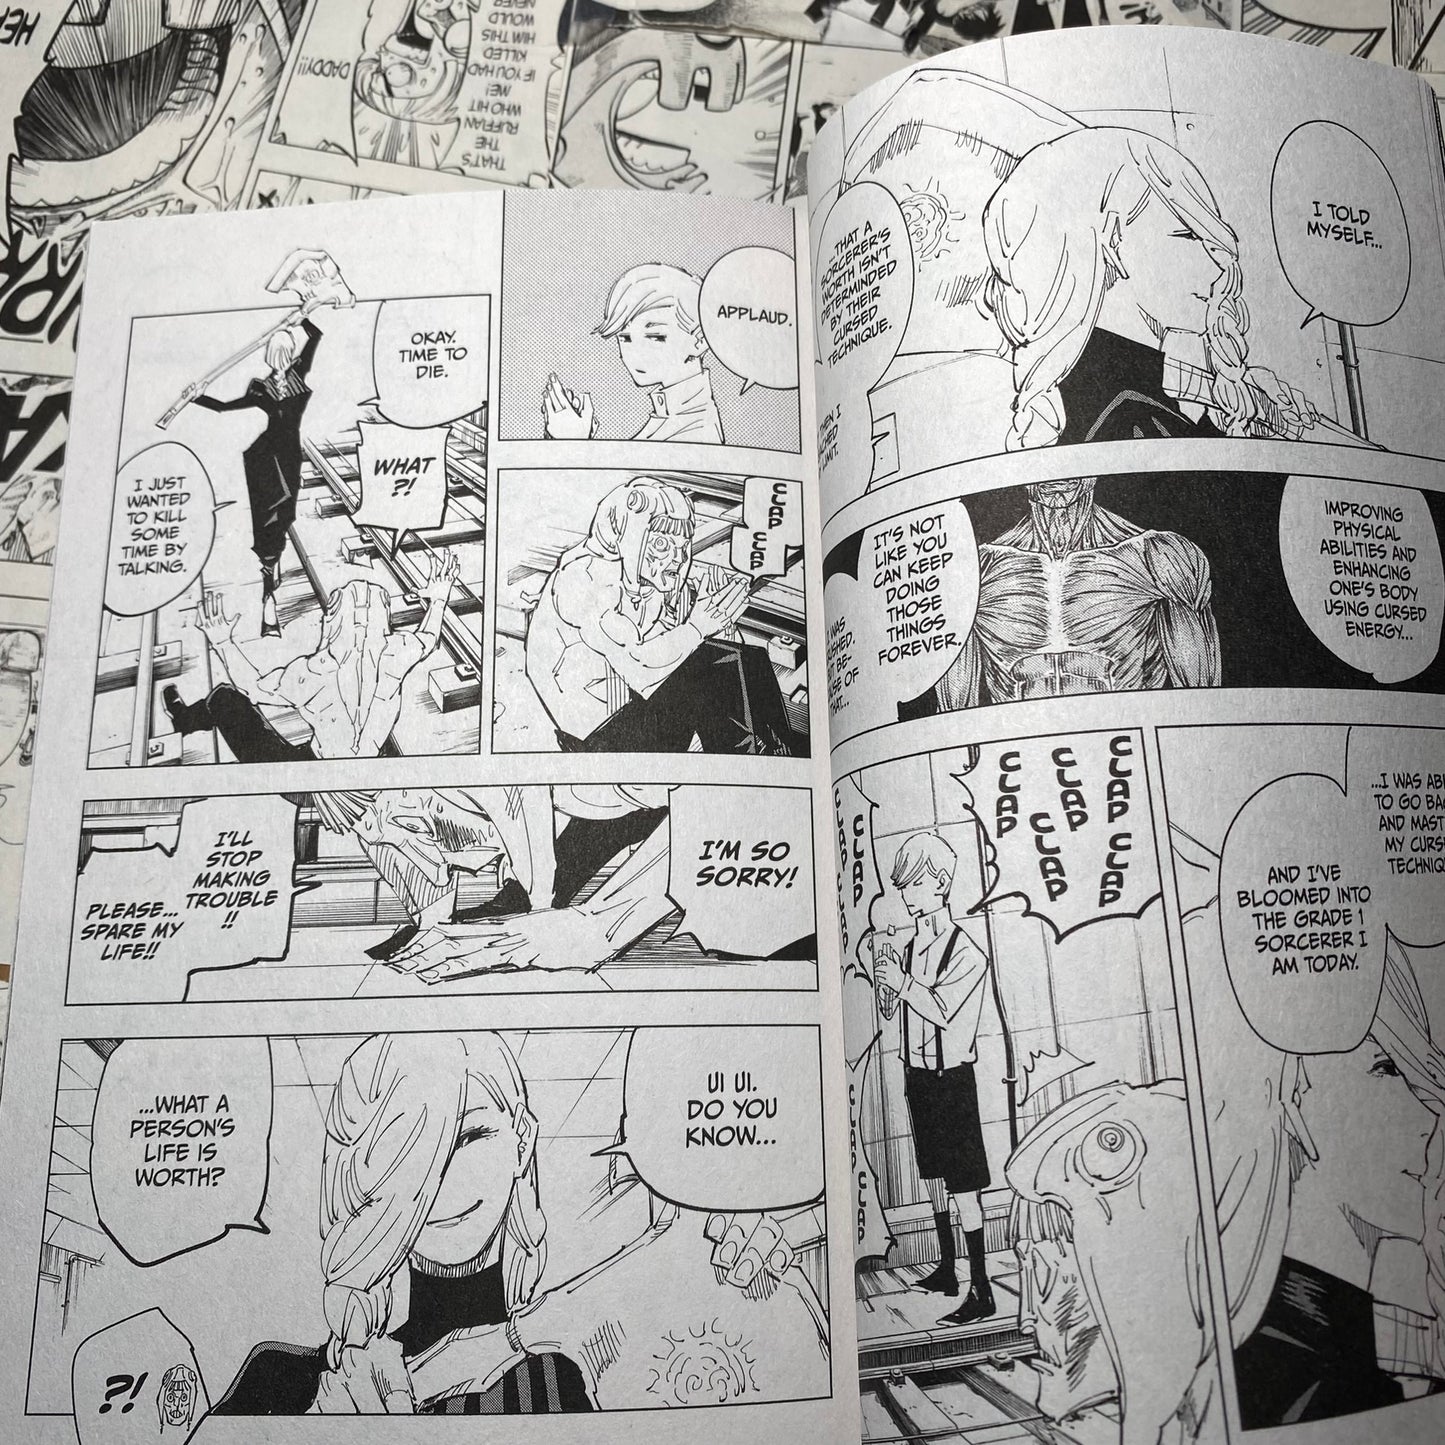 THRIFT STORE - Jujutsu Kaisen Vol 12 Manga by Gege Akutami (CUTS ON BACK COVER + LAST 4 PAGES)